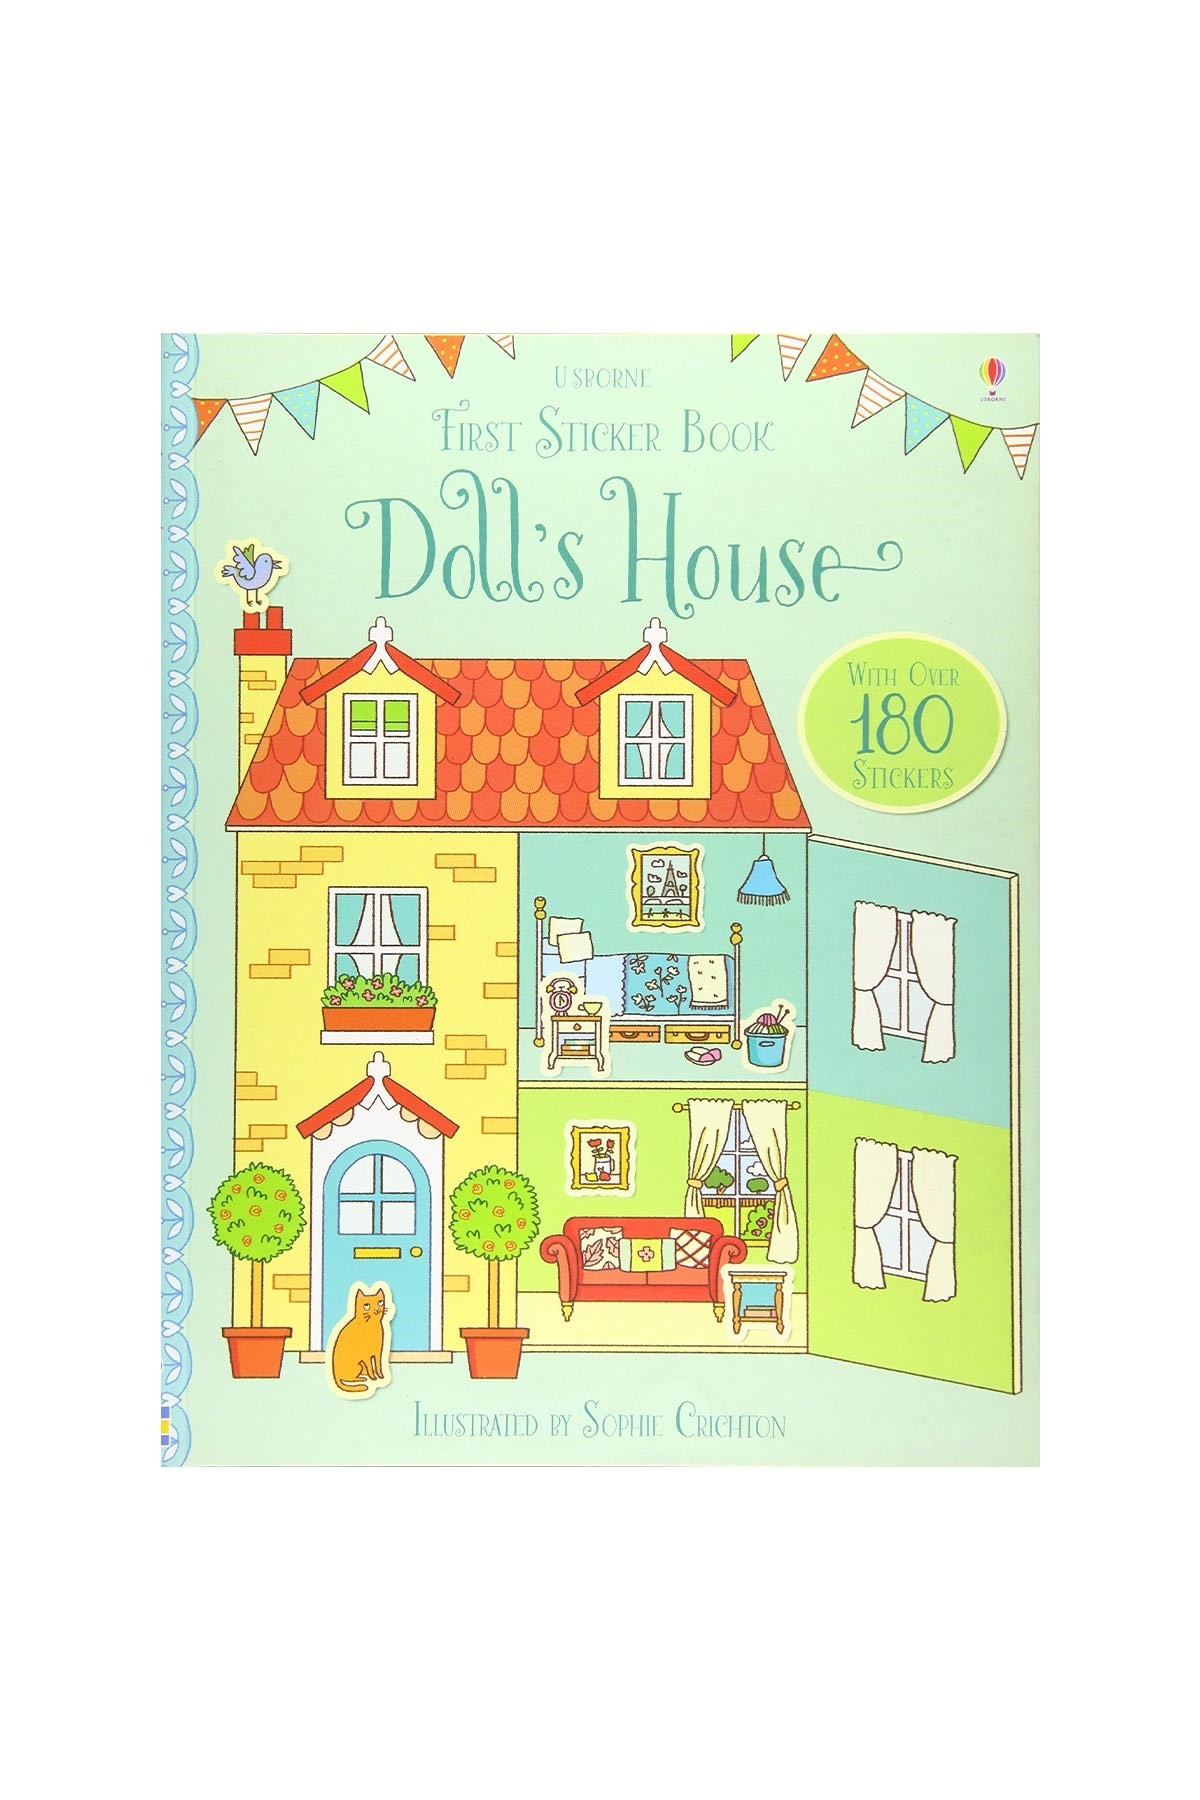 The Usborne First Sticker Book Doll's House